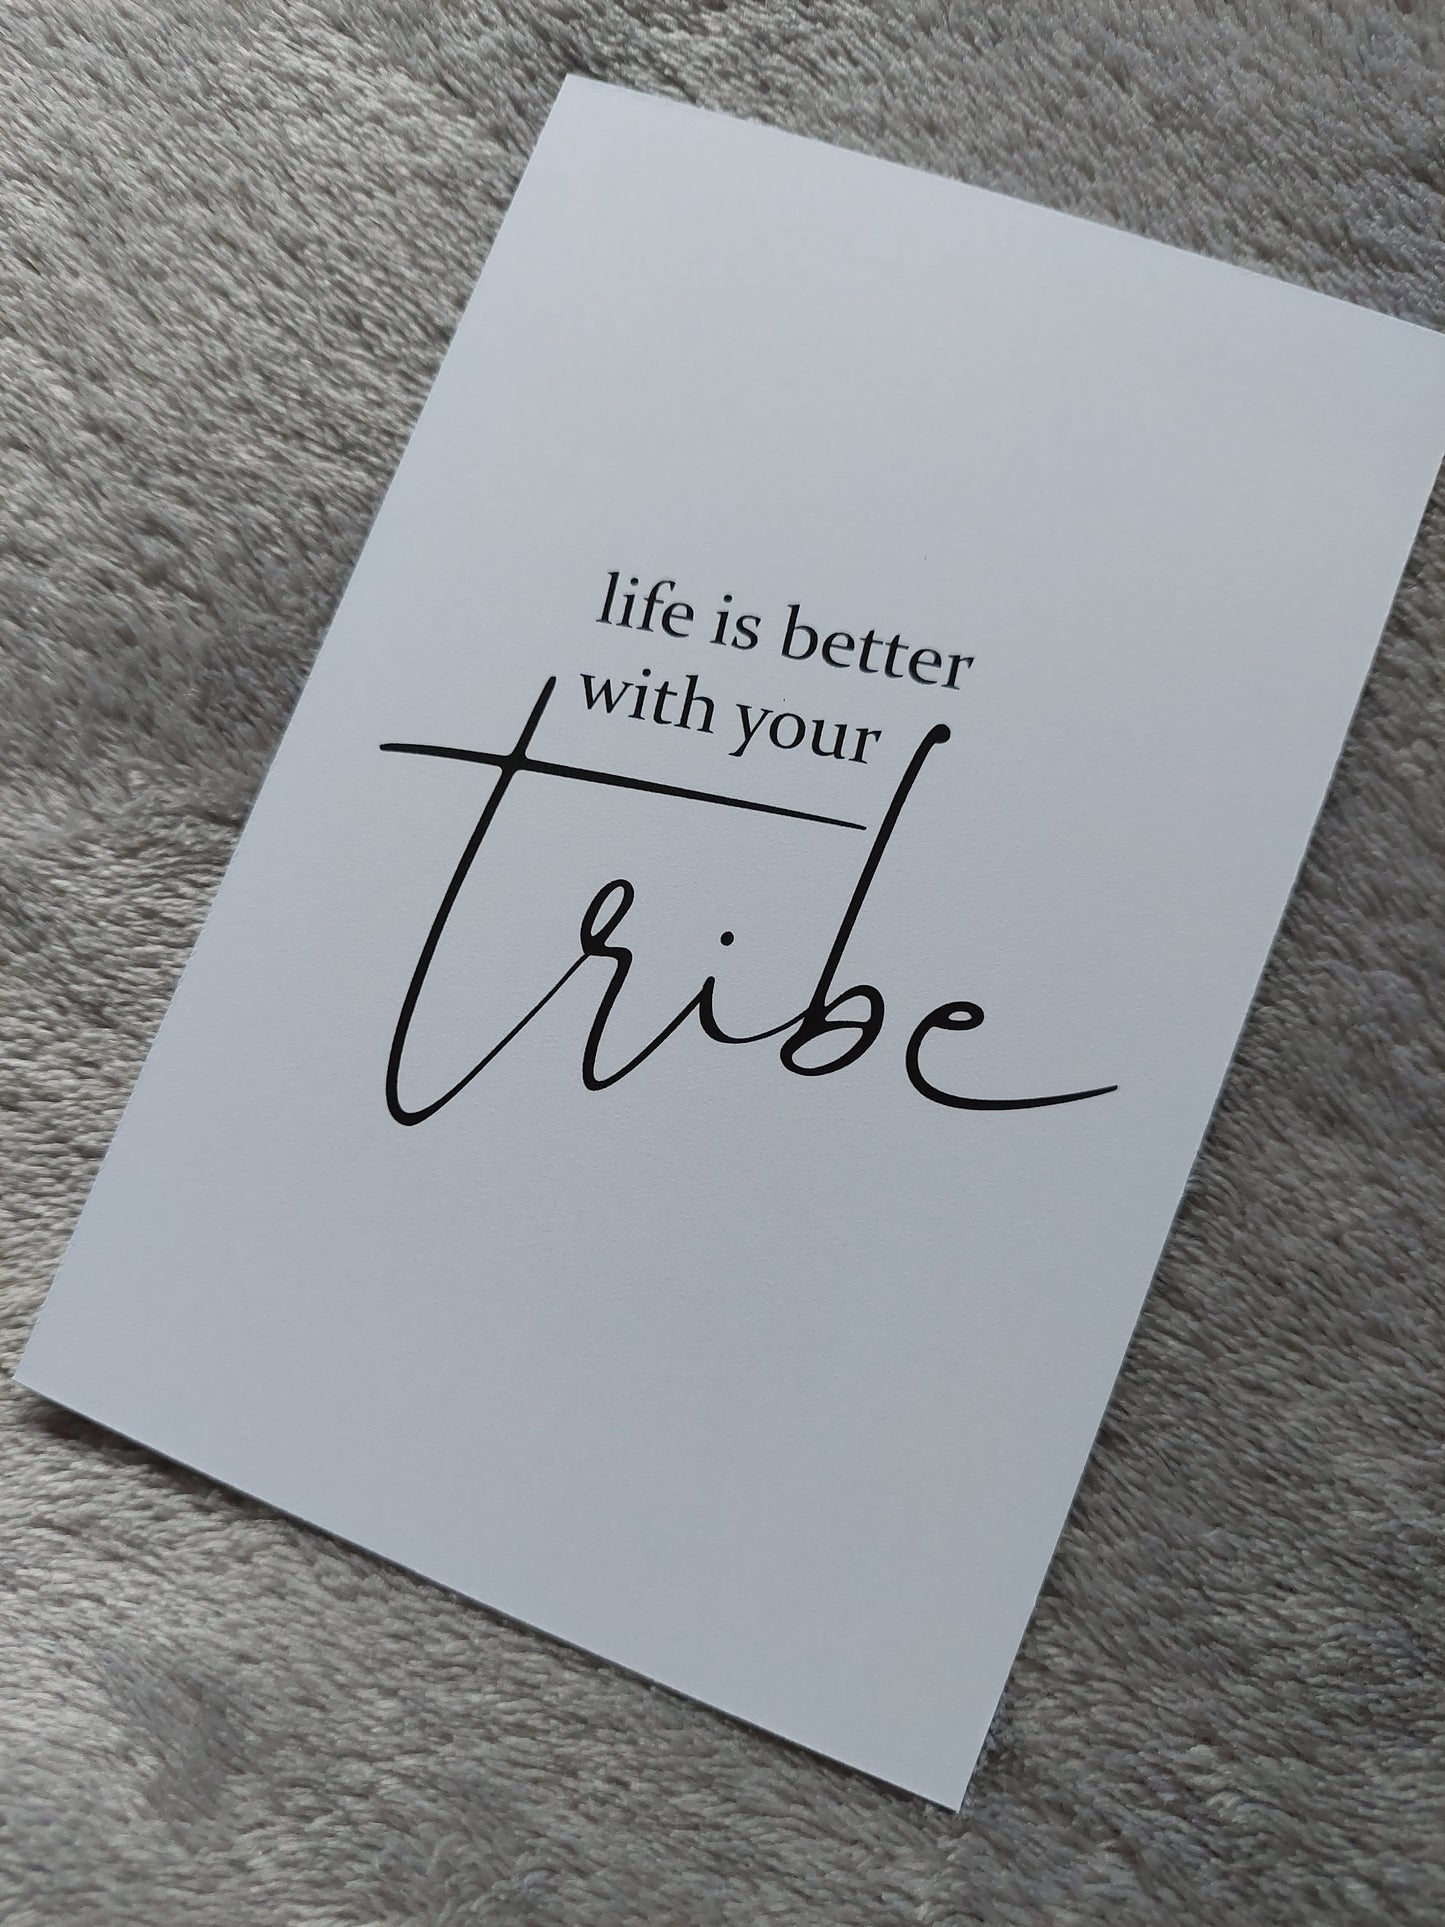 Family Print | Life Is Better With Your Tribe | Quote Print